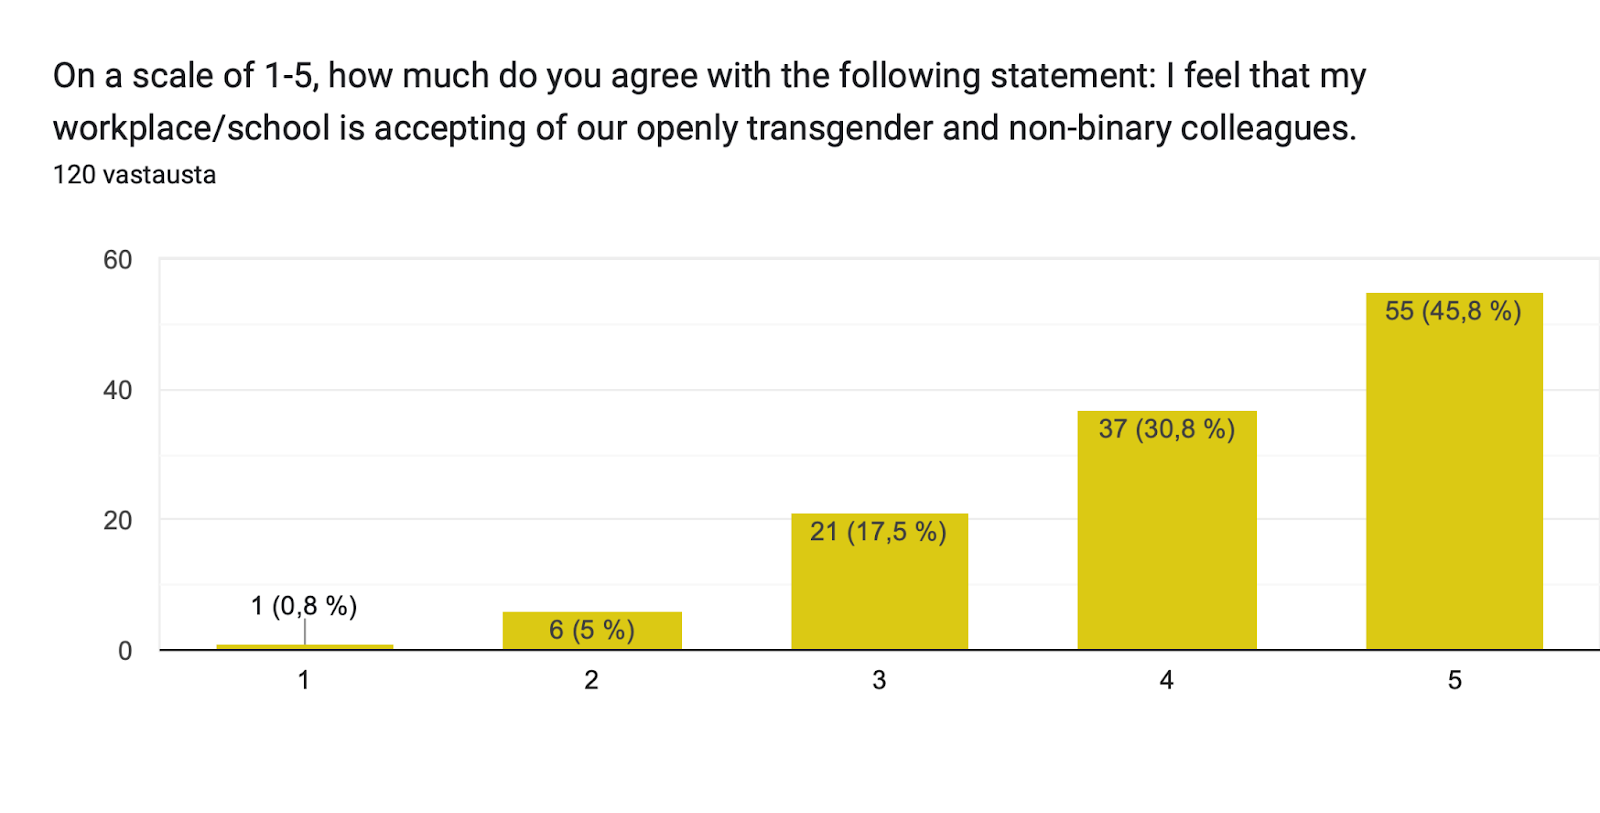 Formsin vastausdiagrammi. Kysymyksen otsikko: On a scale of 1-5, how much do you agree with the following statement: I feel that my workplace/school is accepting of our openly transgender and non-binary colleagues.
. Vastausten määrä: 120 vastausta.